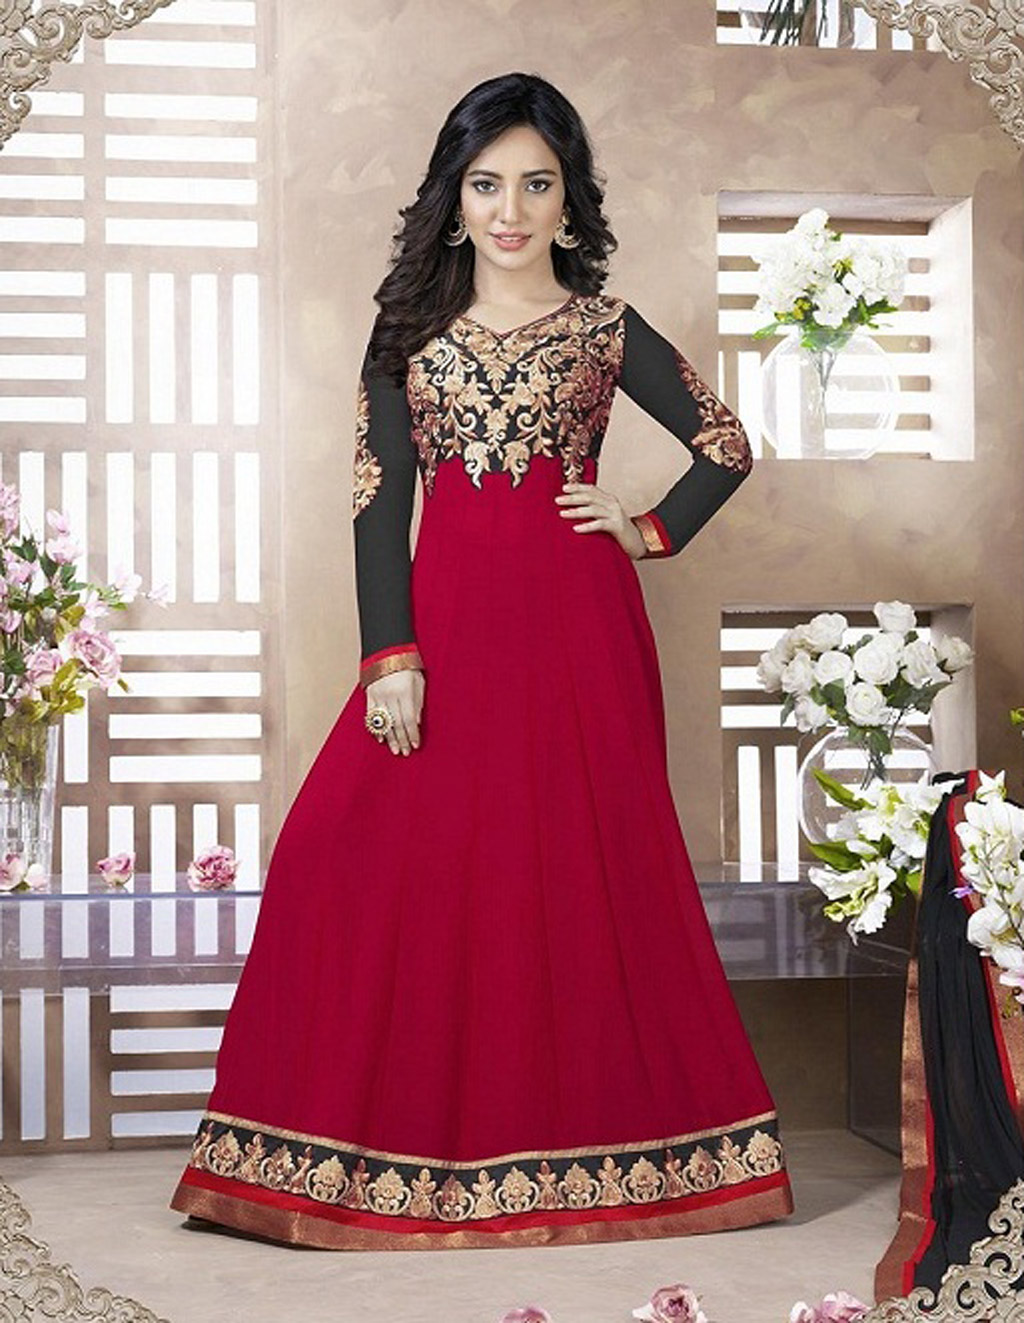 Neha Sharma Red Faux Georgette Bollywood Anarkali Suit 57150